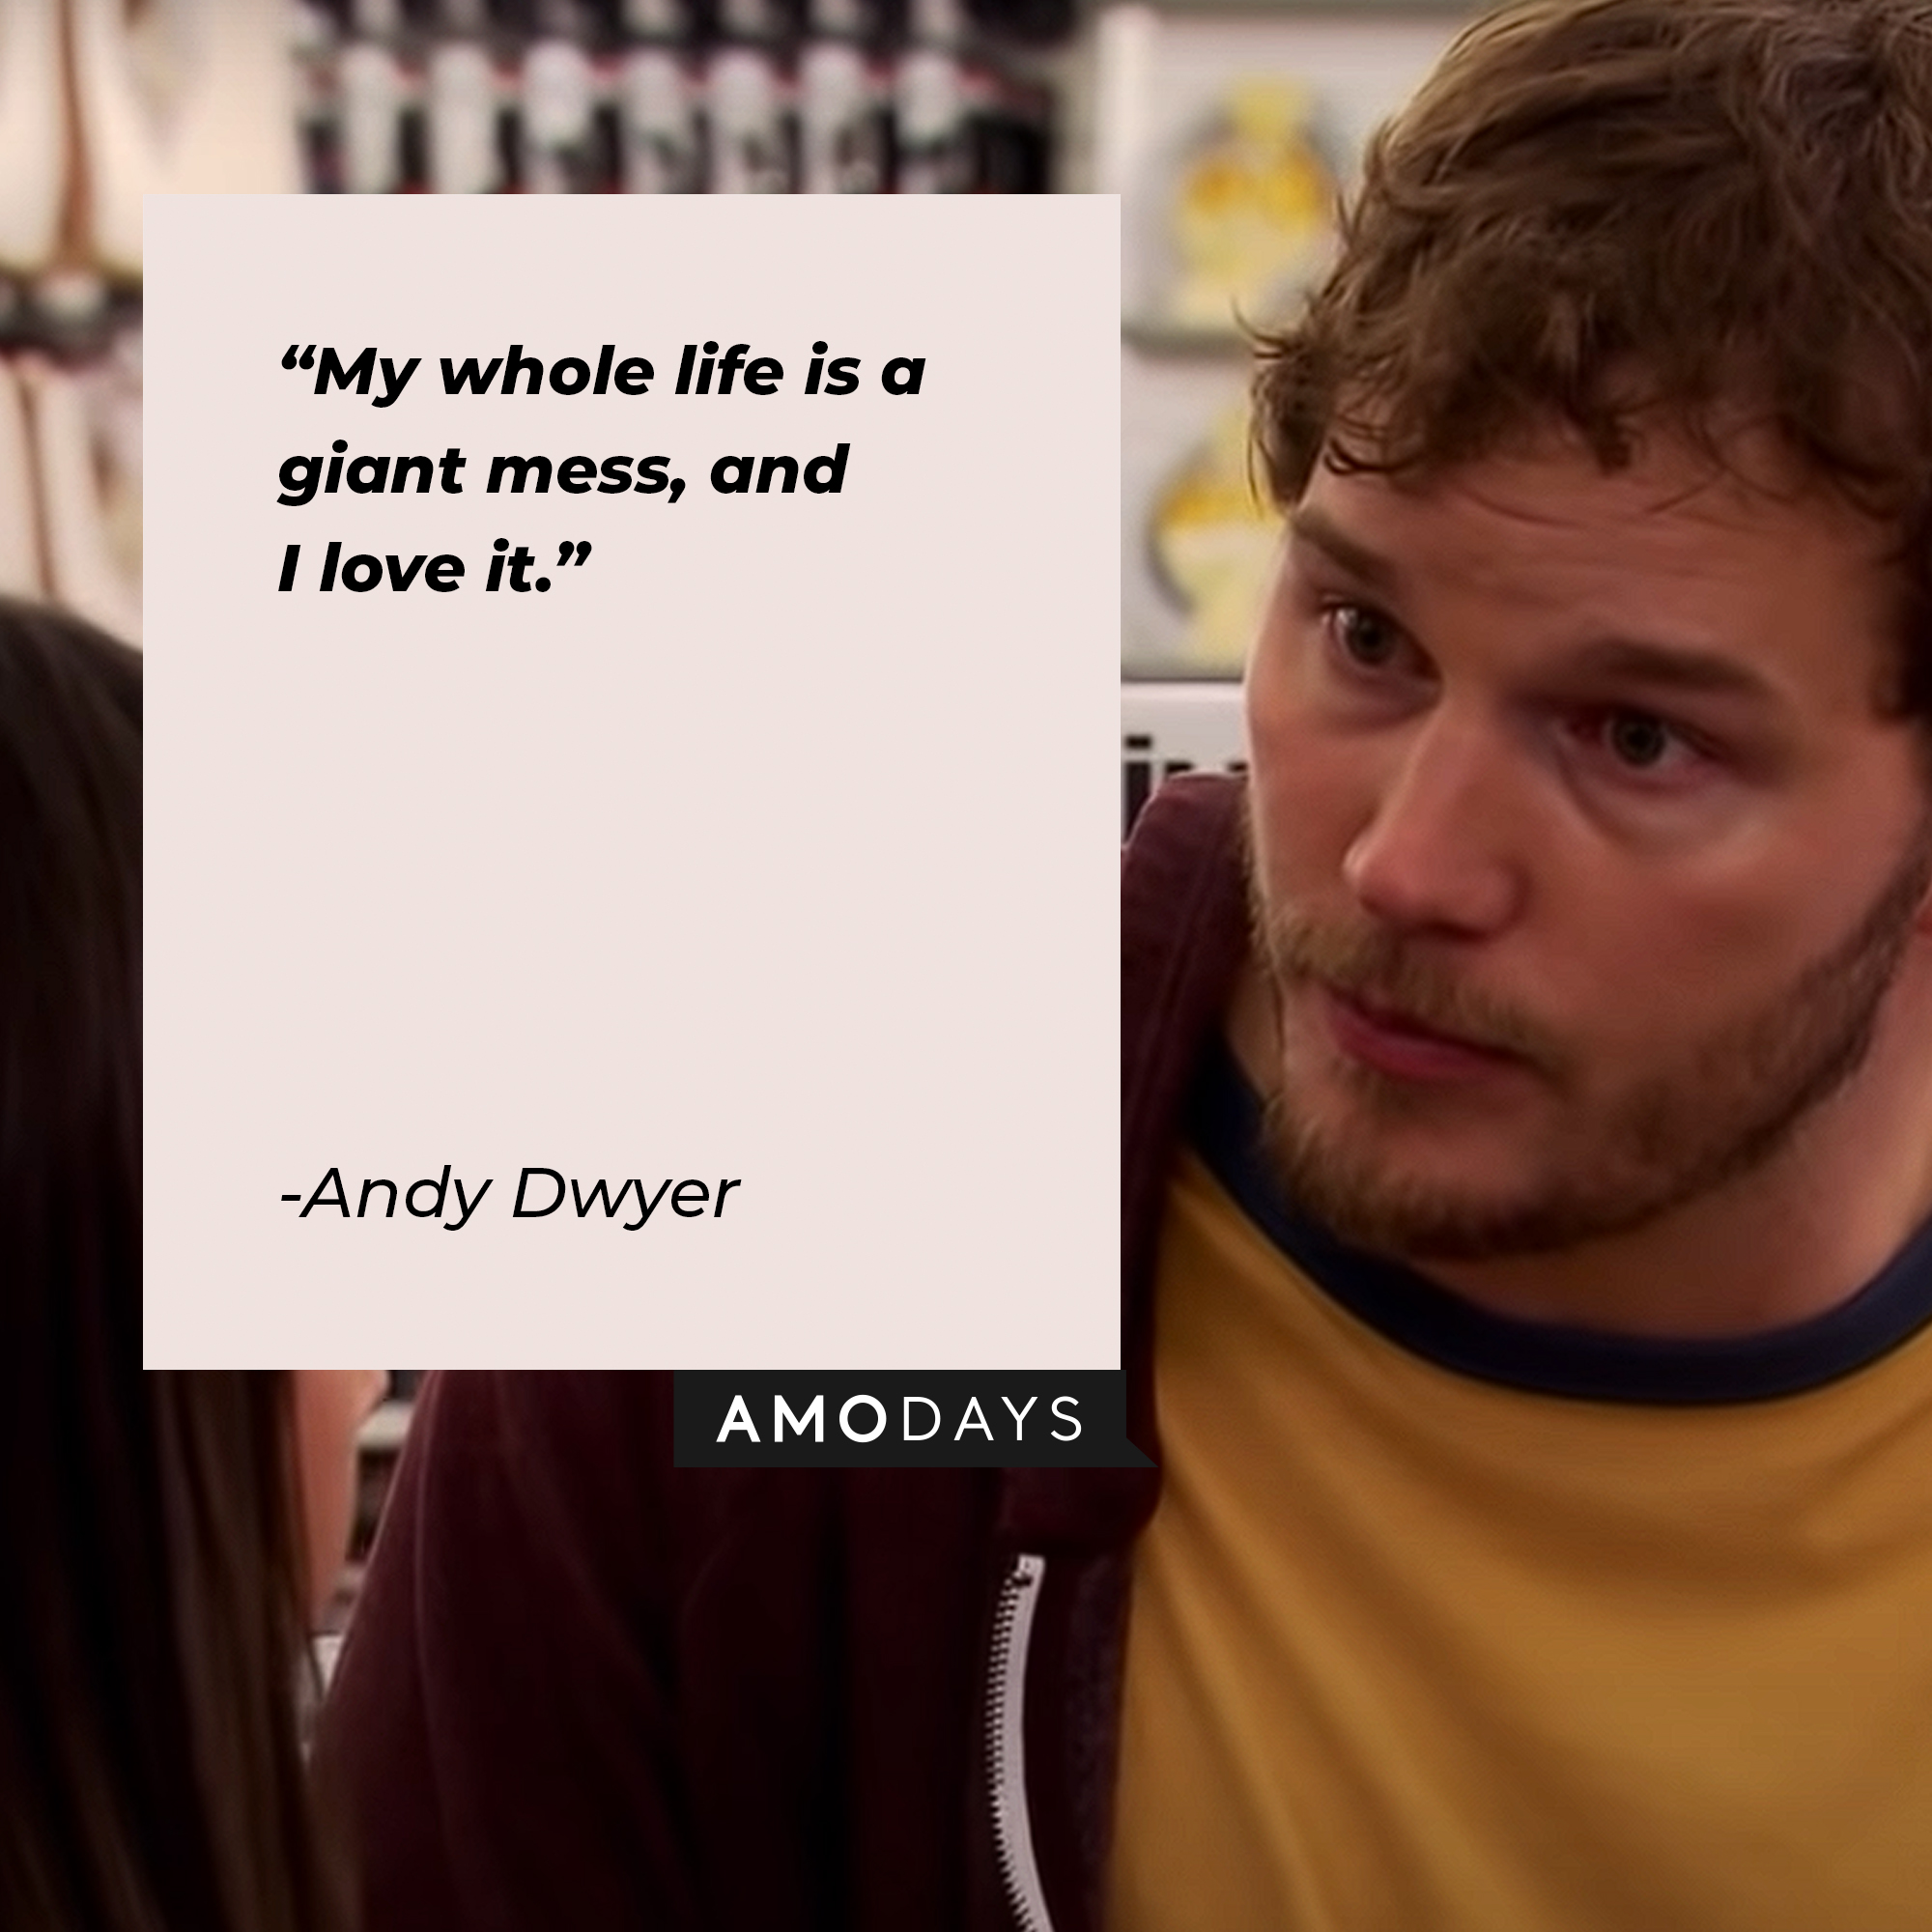 "My whole life is a giant mess, and I love it.” | Source: youtube.com/ParksandRecreation